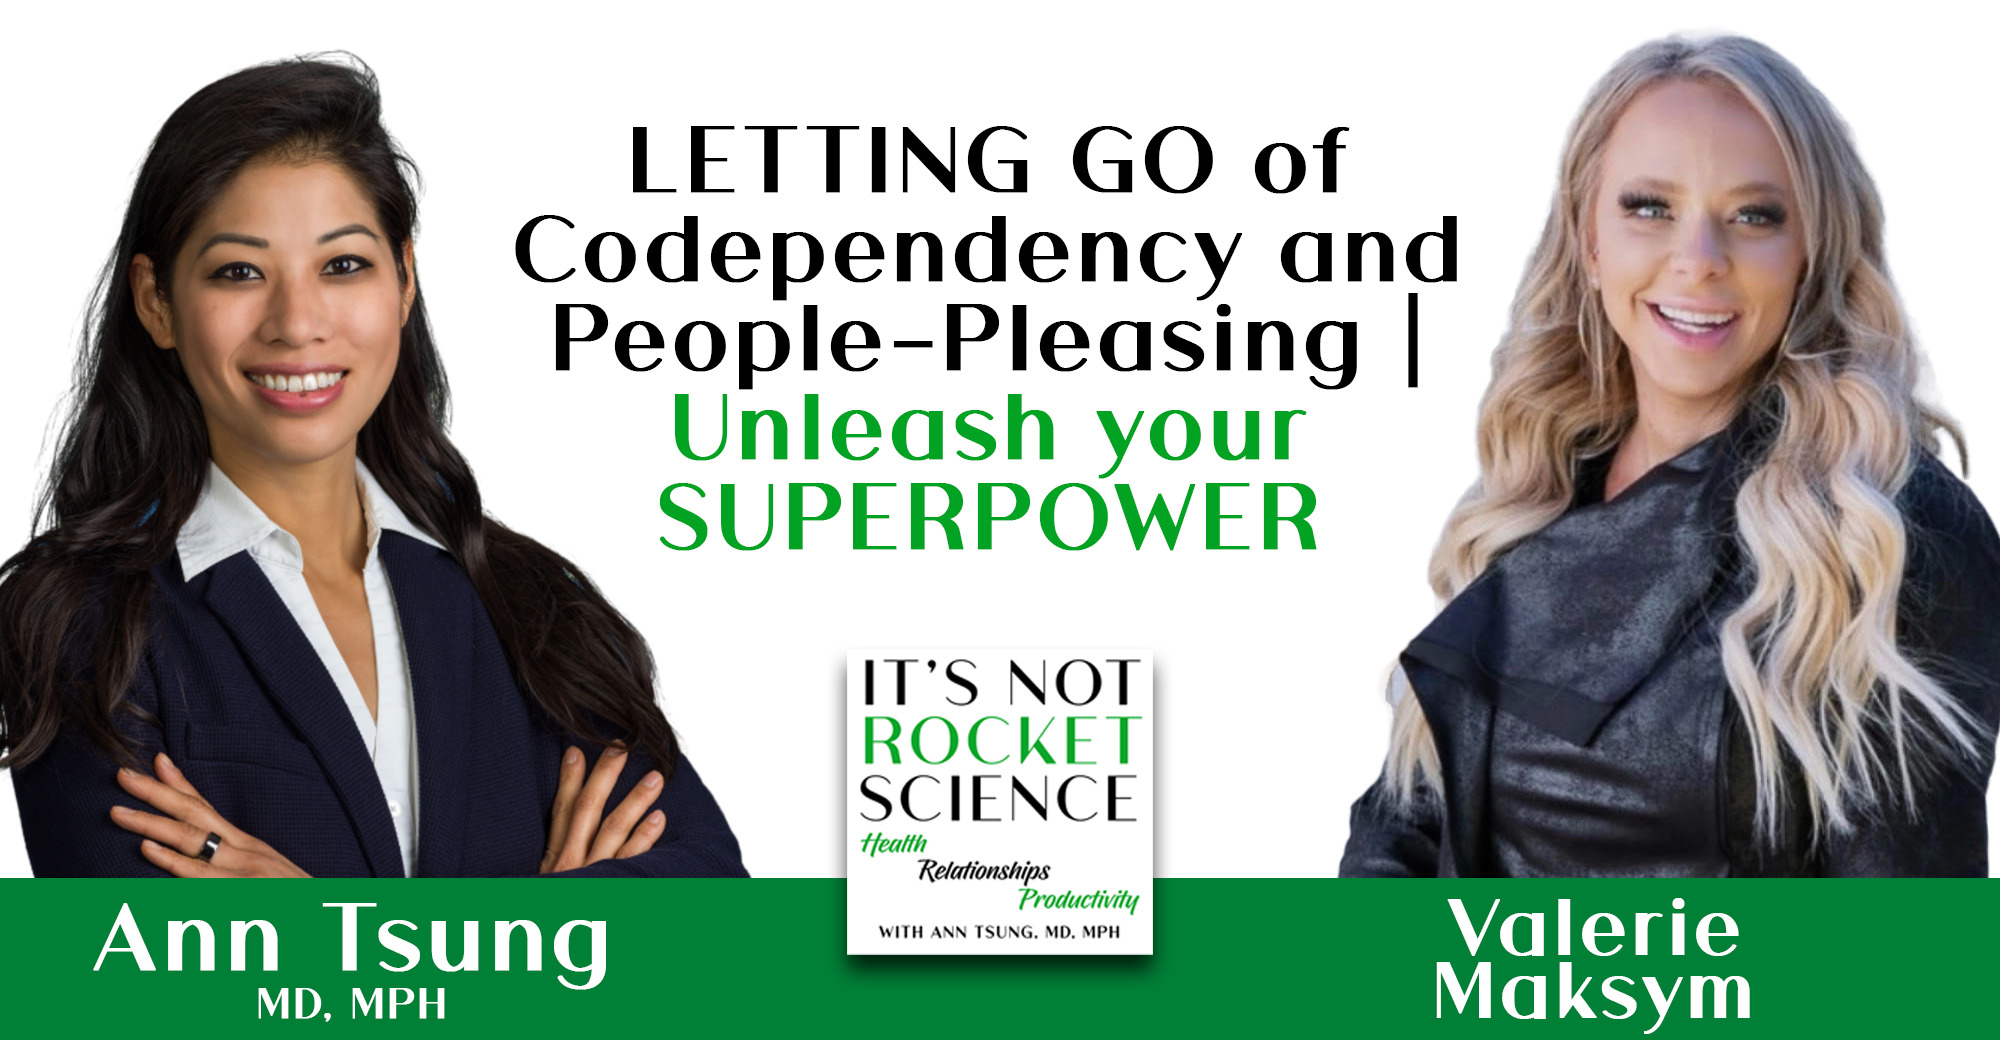 031. LETTING GO of Codependency and People-Pleasing | Unleash your SUPERPOWER with Valerie Maksym